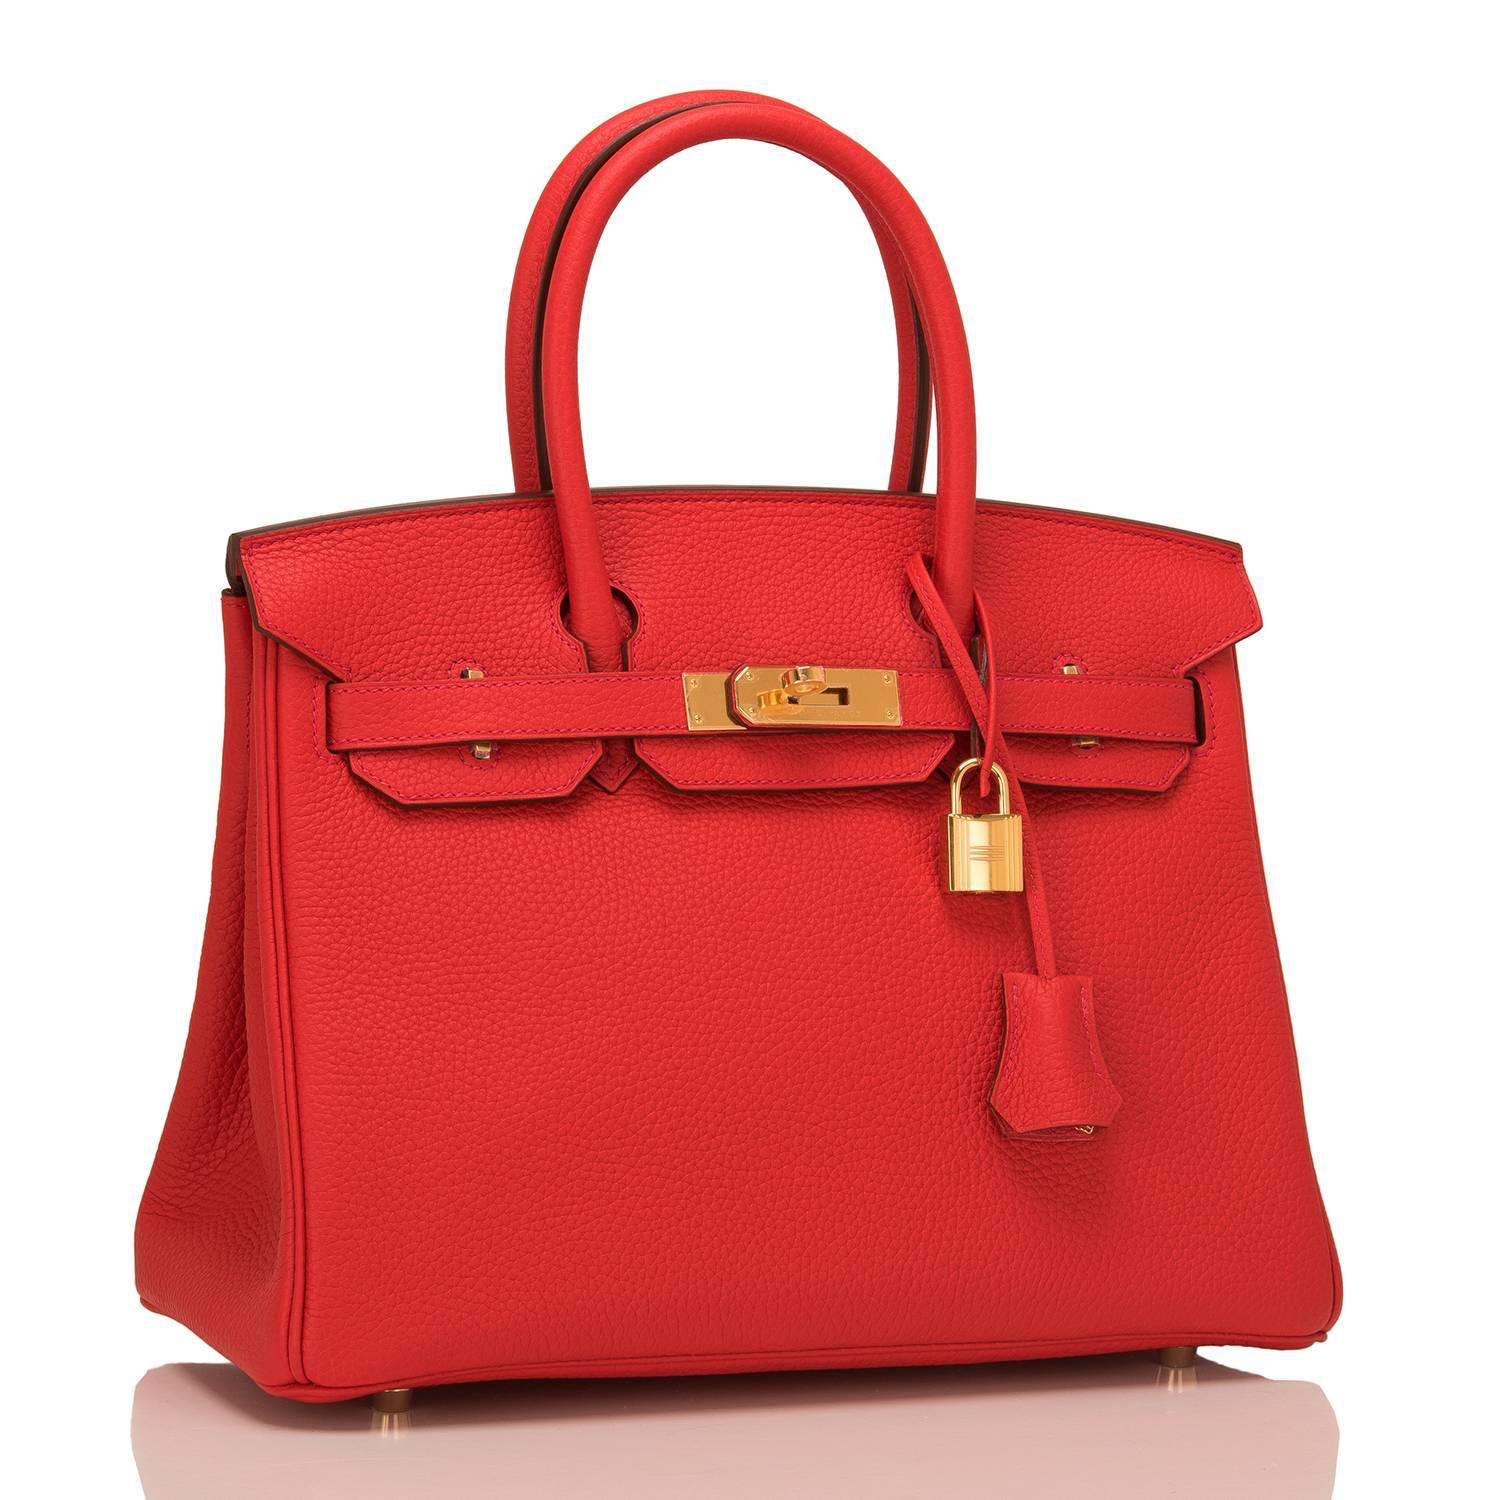 Hermes Birkin 30cm of Rouge Tomate of clemence leather with gold hardware.

This Birkin features tonal stitching, a front toggle closure, a clochette with lock and two keys, and double rolled handles.

The interior is lined with Rouge Tomate